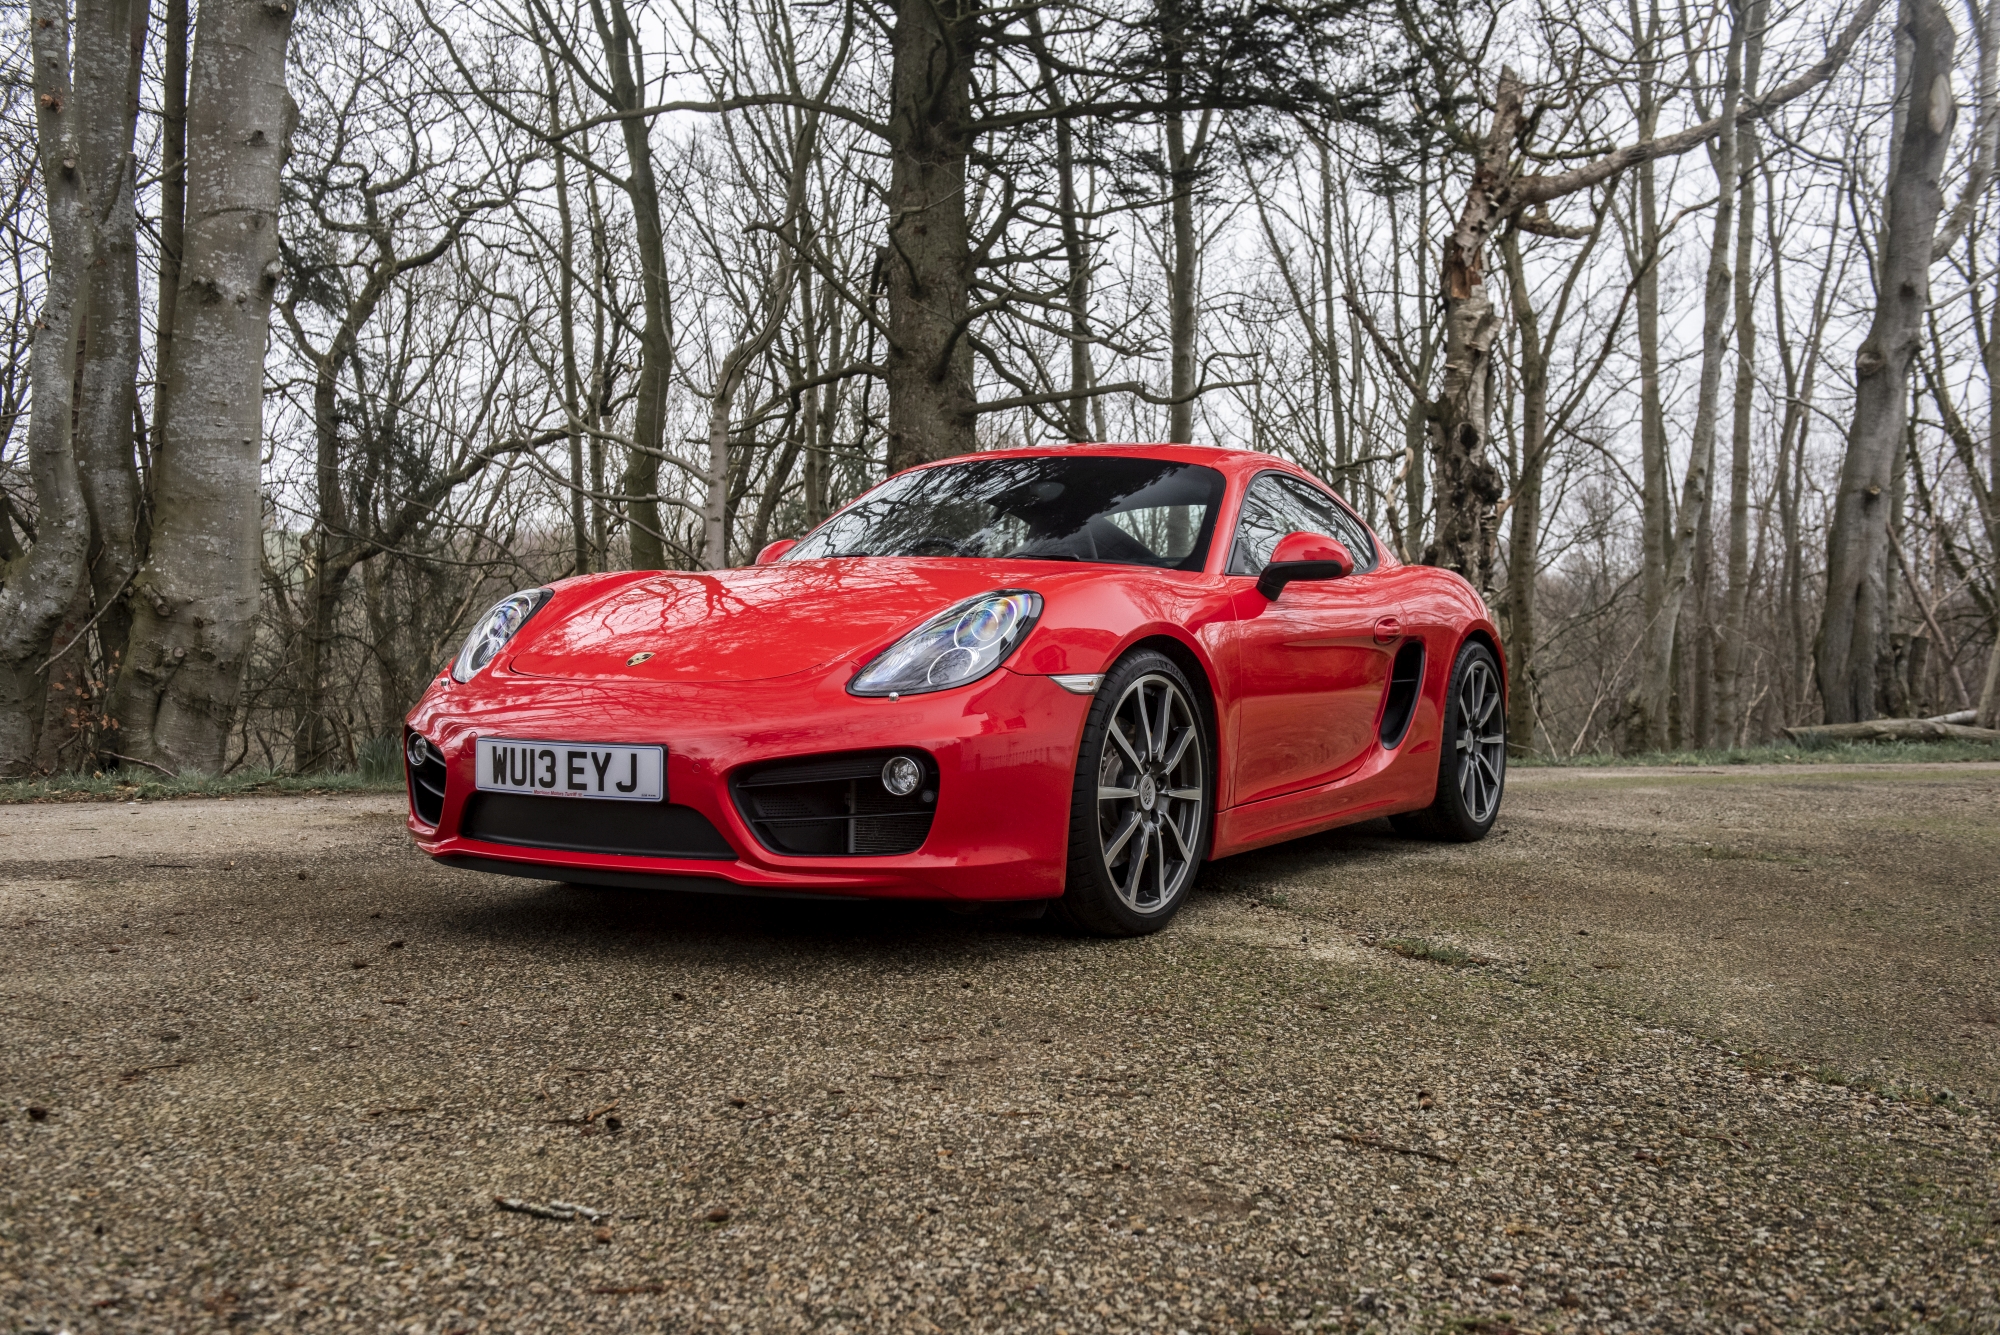 2013 PORSCHE (981) CAYMAN S for sale by auction in Turriff, Aberdeenshire, United Kingdom image